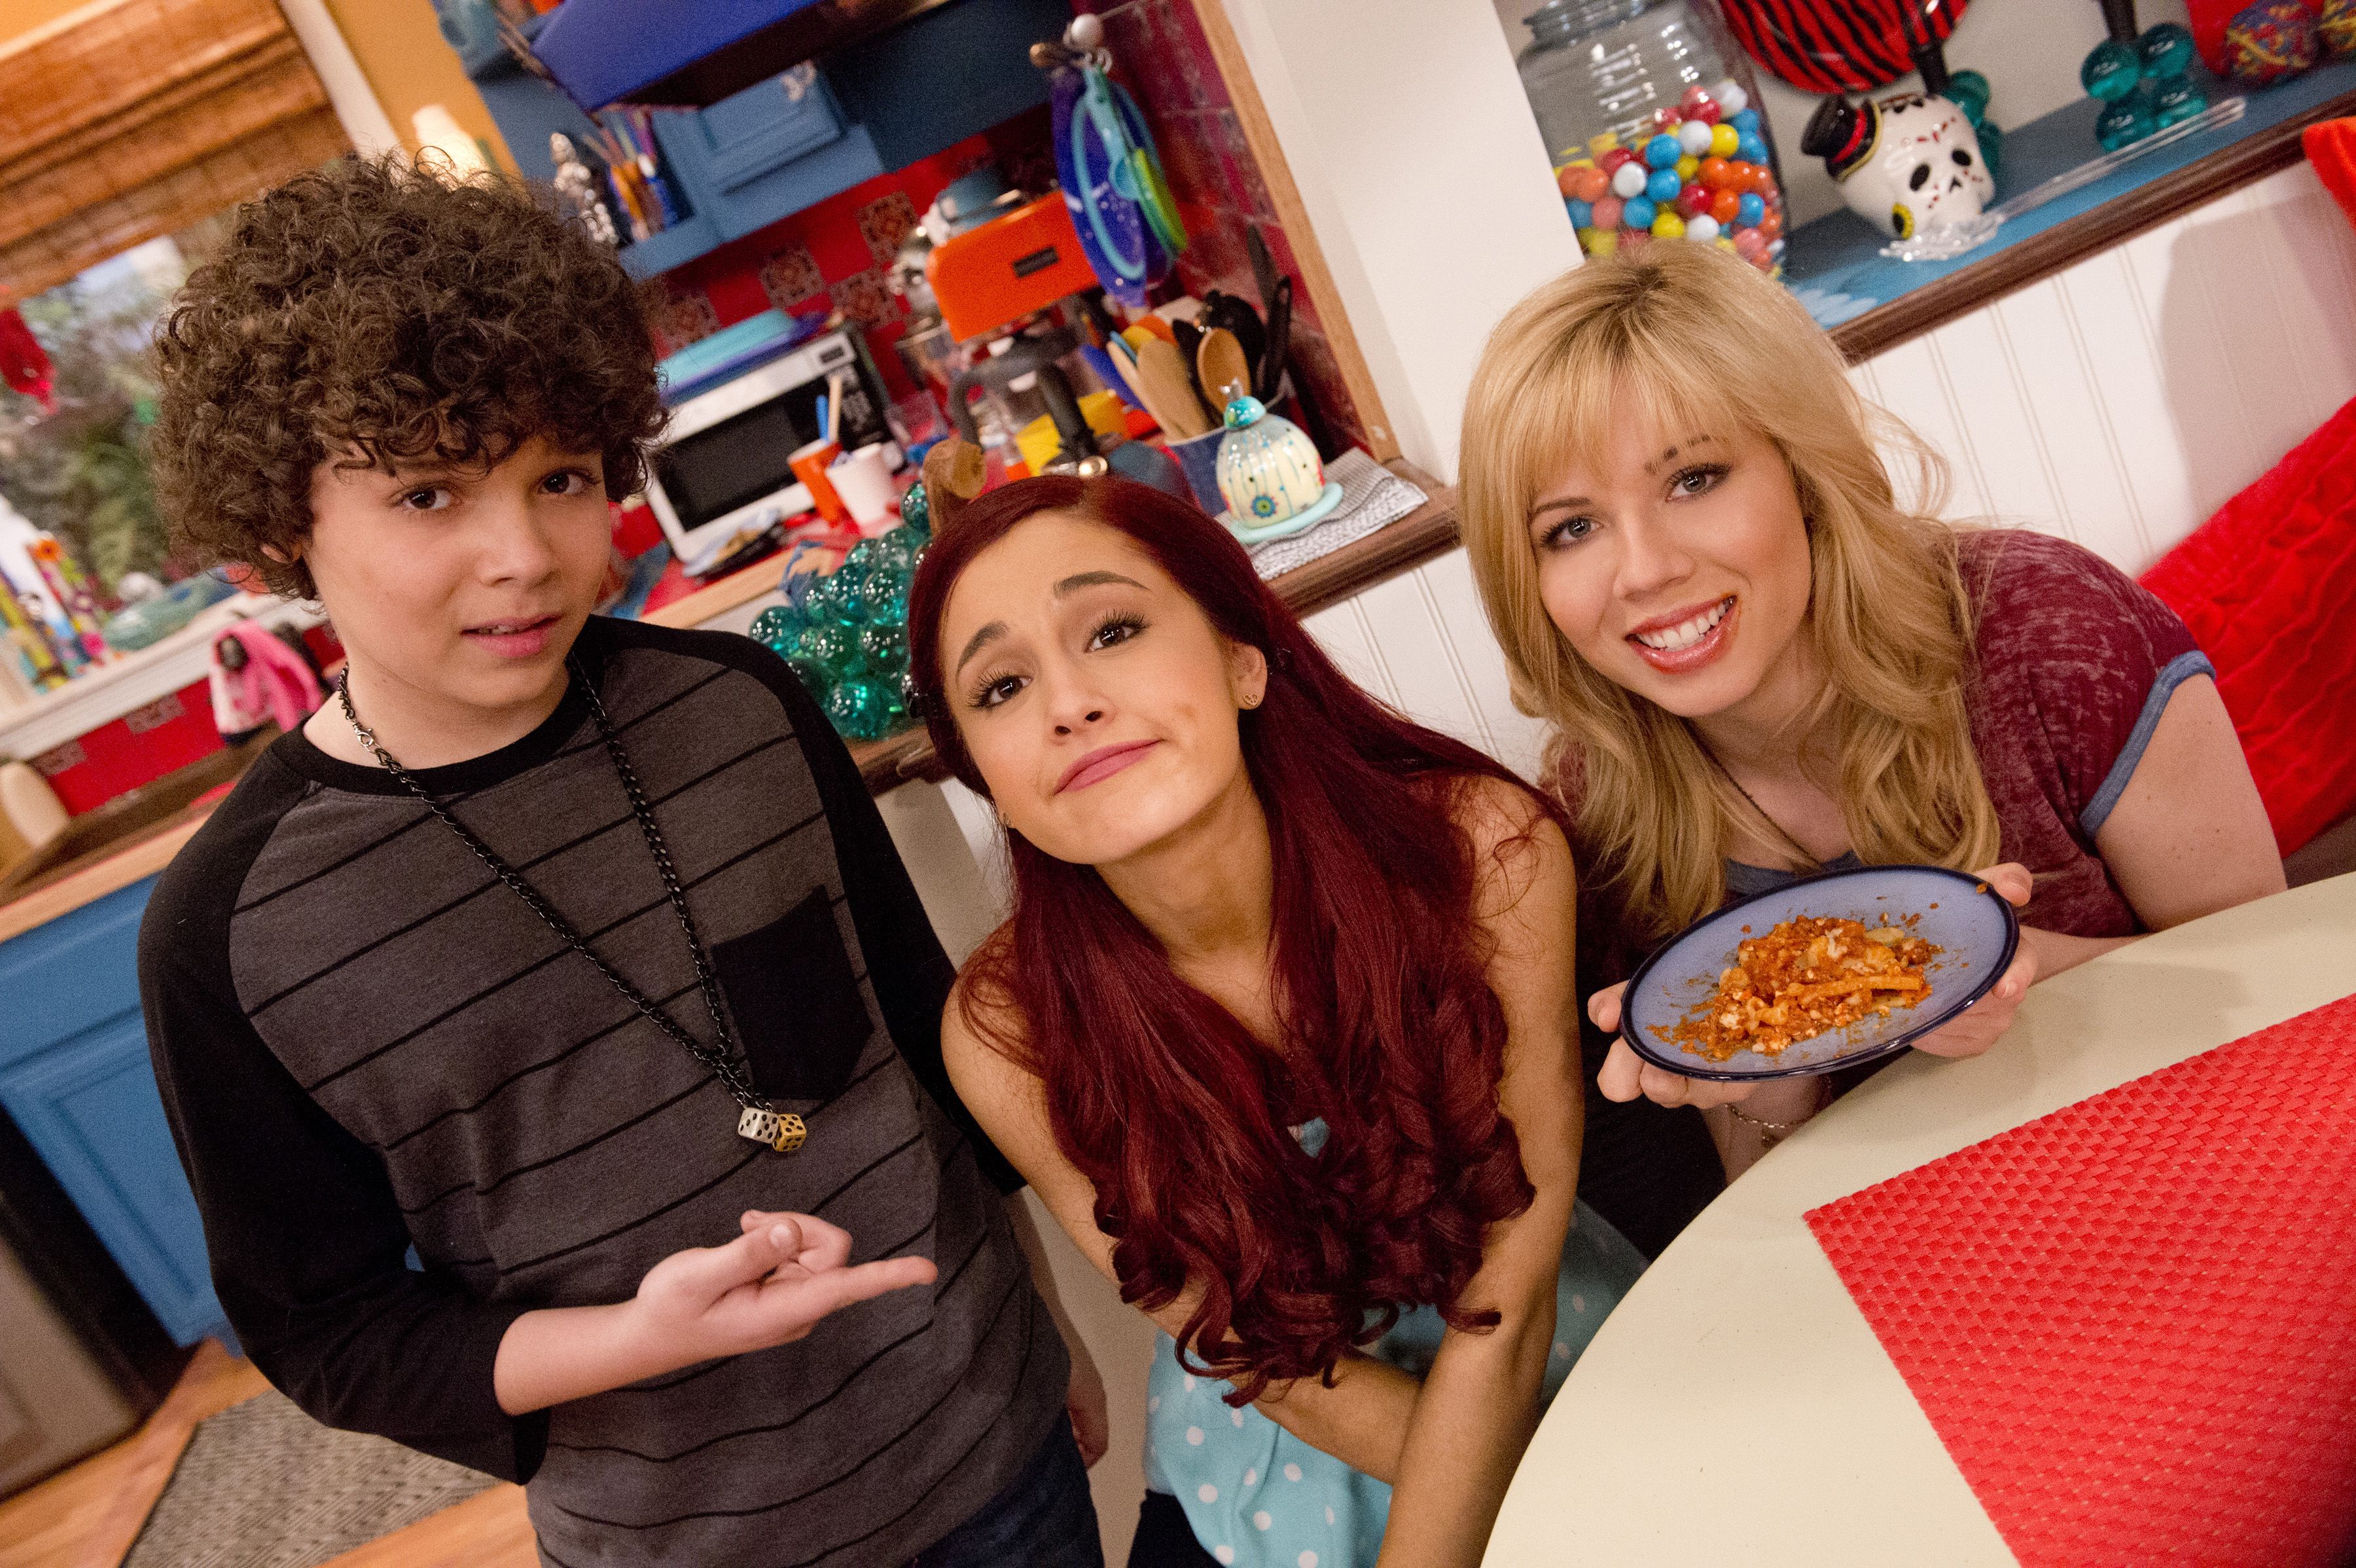 Sam and Cat Theme Song. Movie Theme Songs & TV Soundtracks